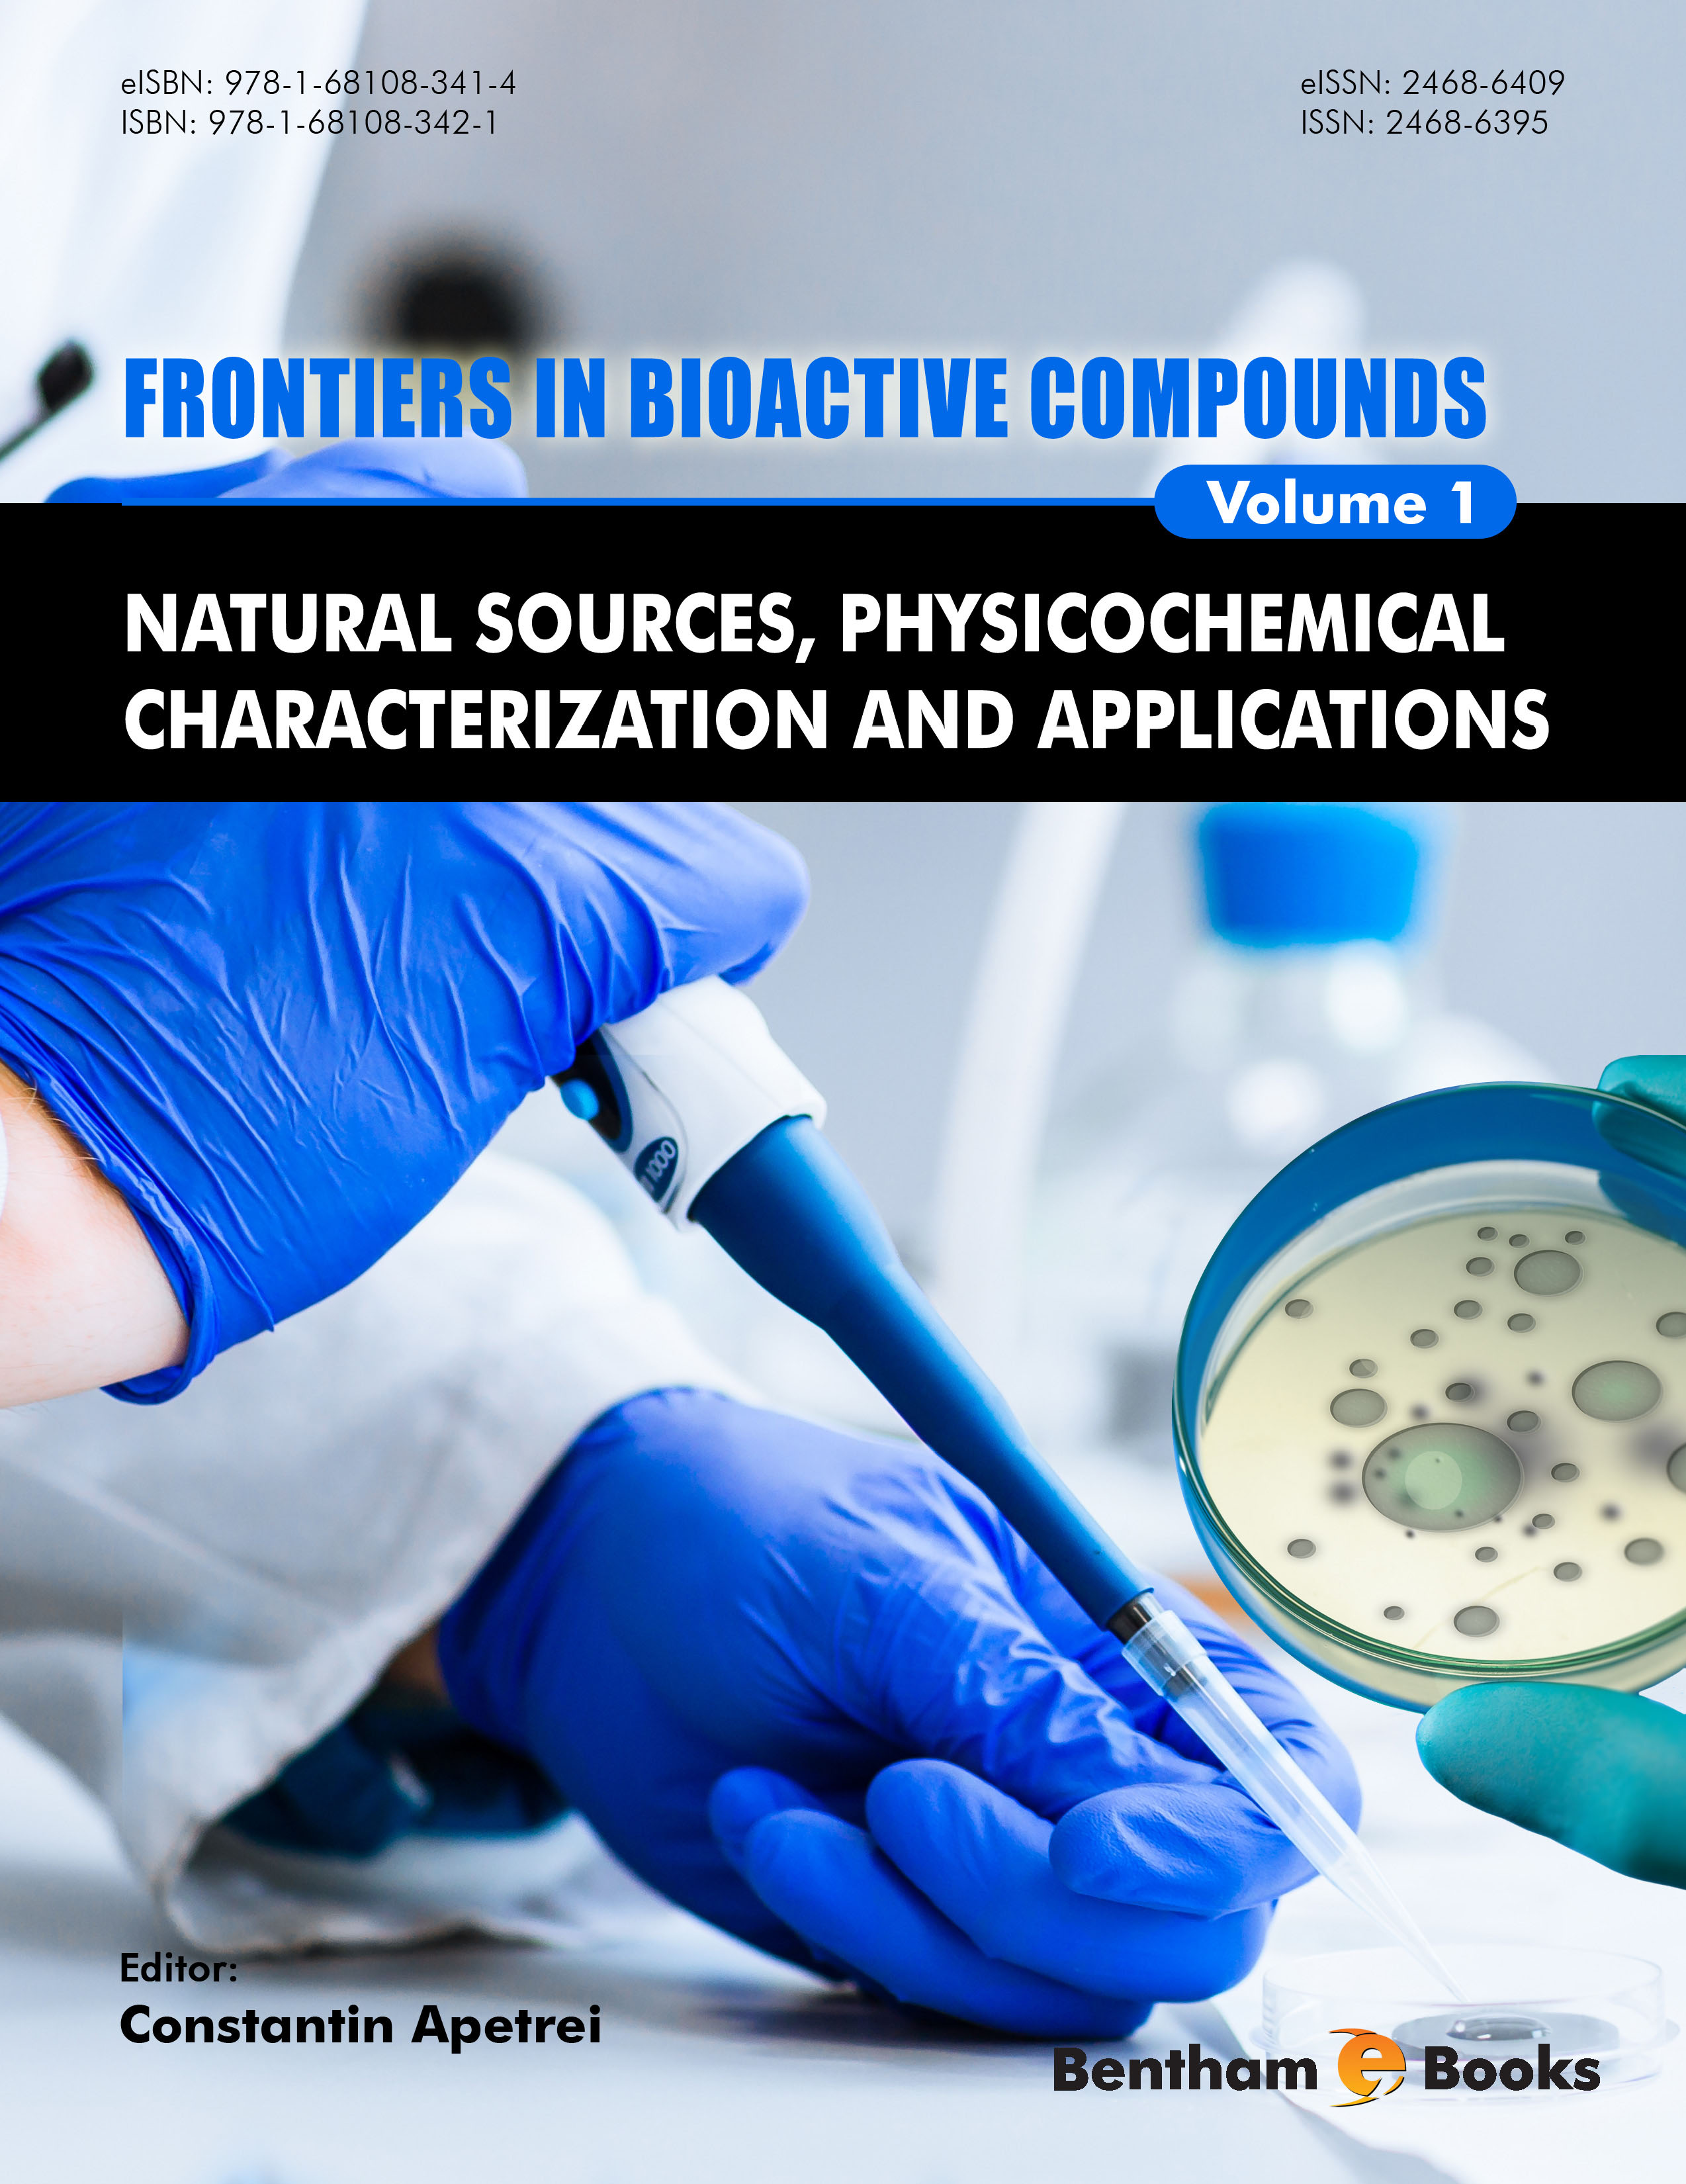 Natural Sources, Physicochemical Characterization and Applications